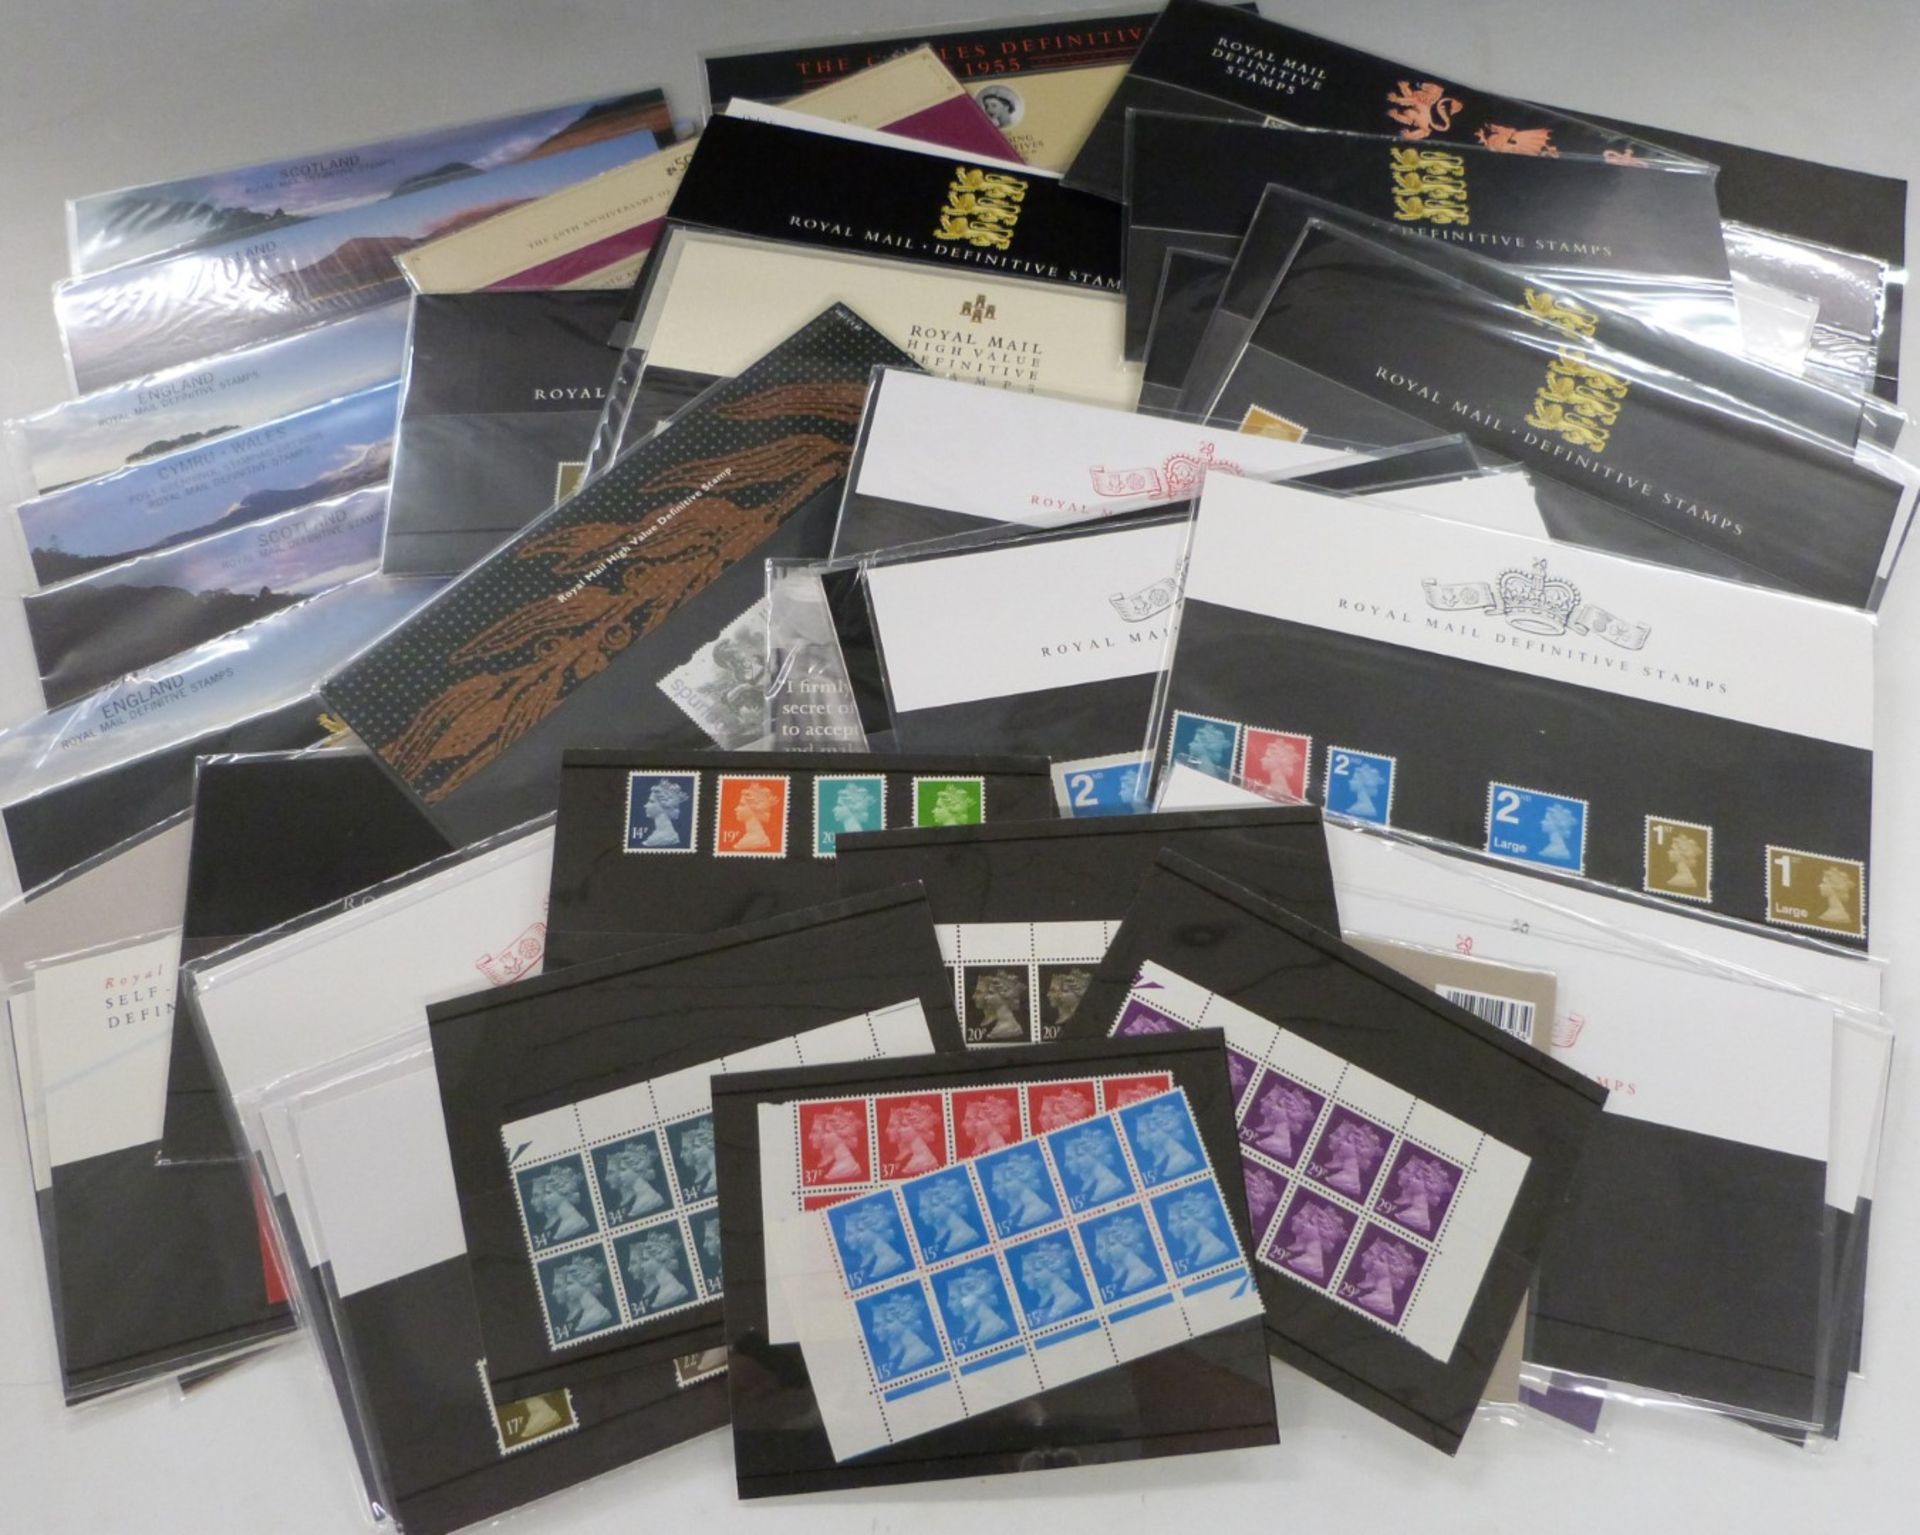 Approximately 60 GB definitive stamp presentation packs and sundry other definitive stamps, face